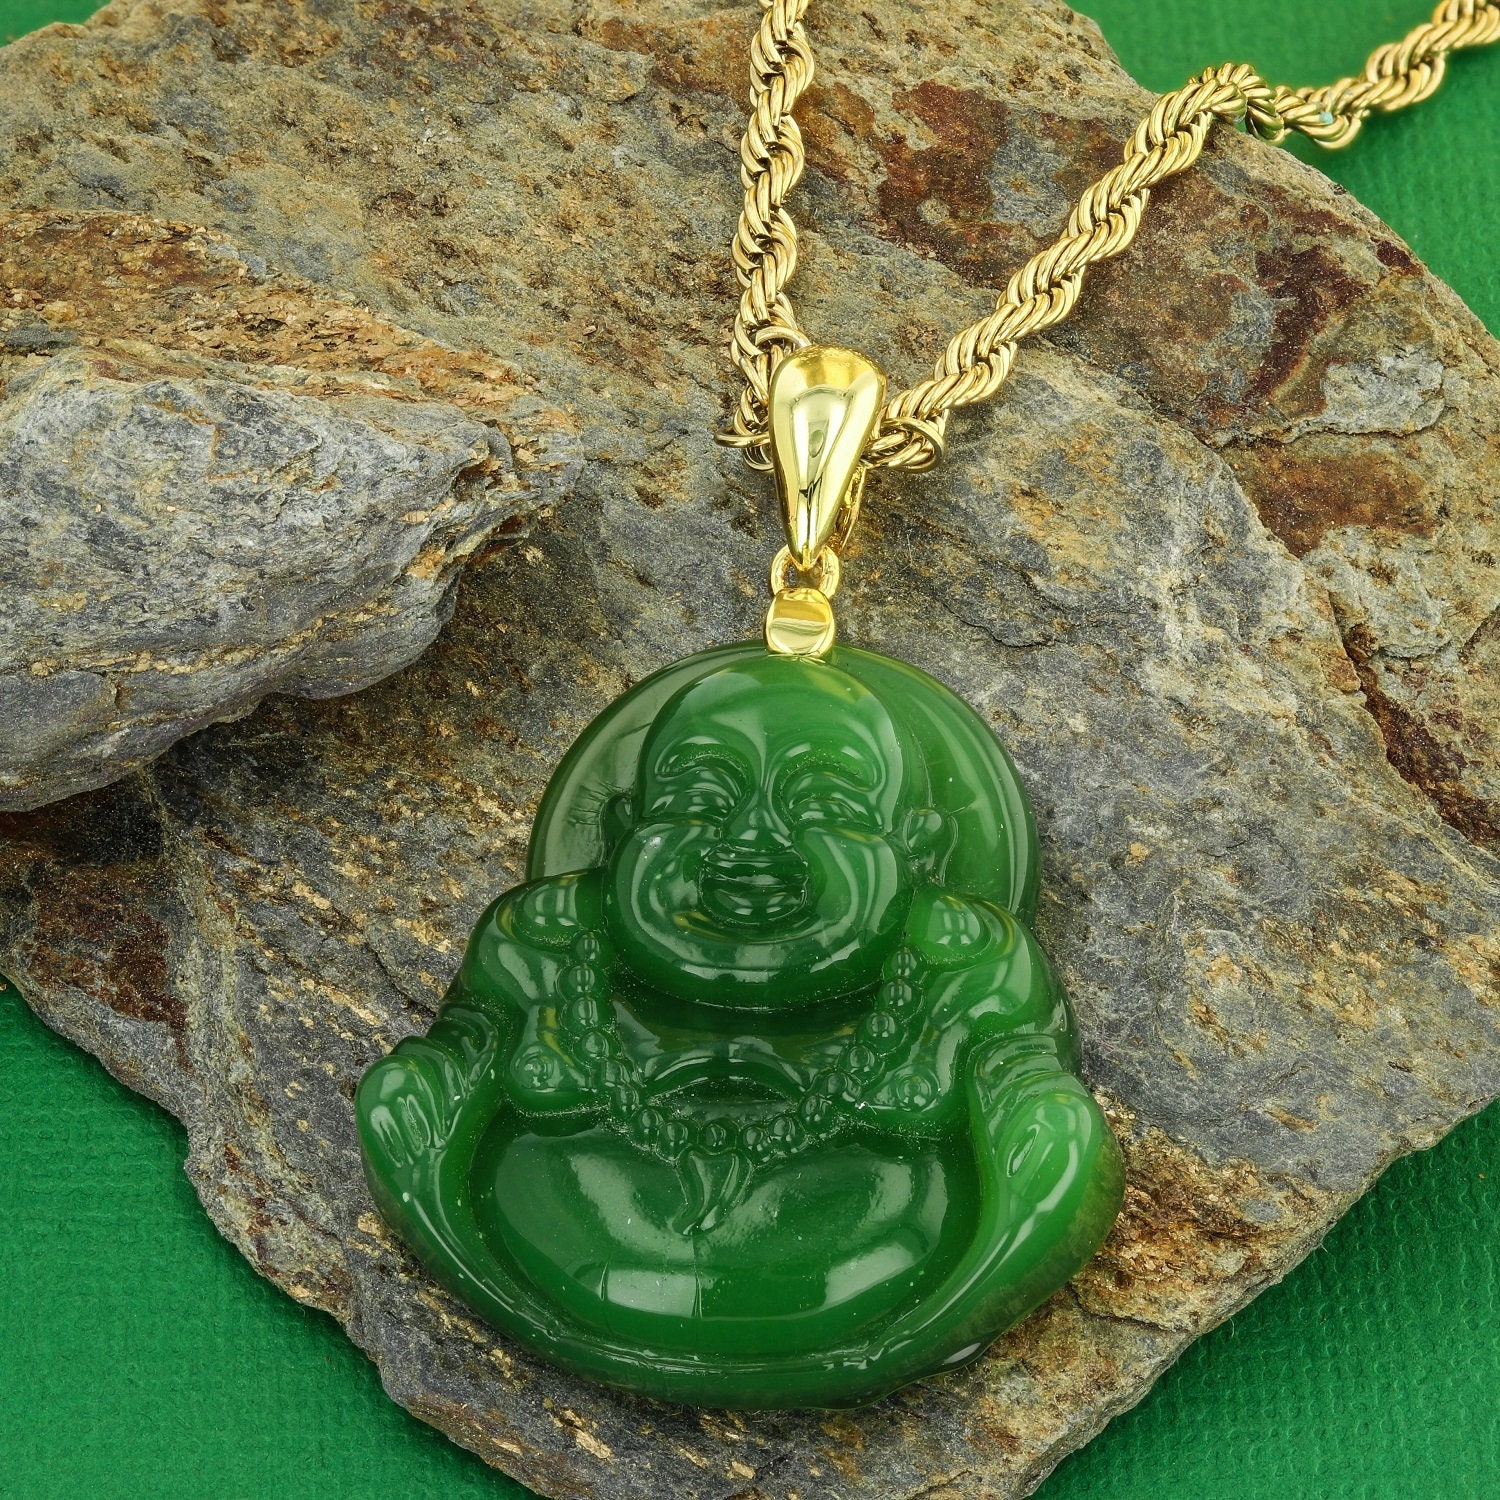 Jade Laughing Buddha Buddah Necklaces For Women Men,Ice Out Buddha Pendant For Men Women with Stainless Steel Gold Chain 24 inches 